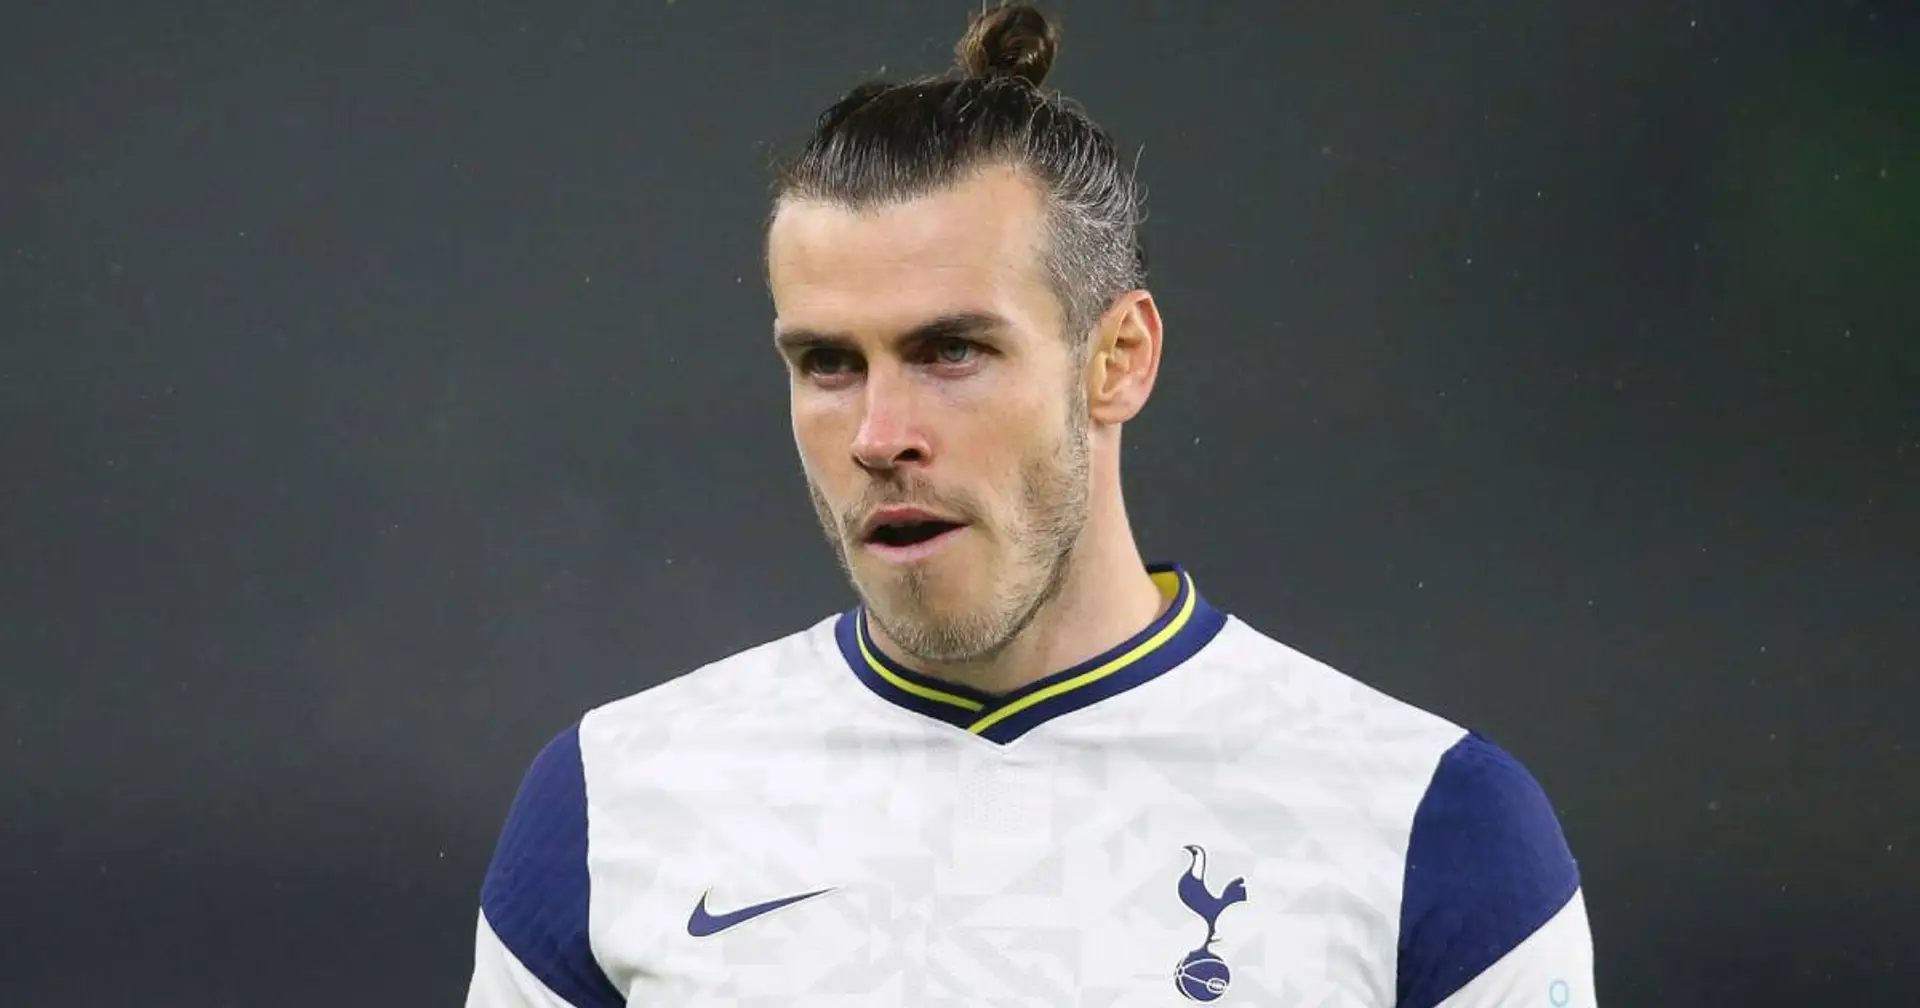 'He's so far down the pecking order': former Spurs player Robinson amazed at Gareth Bale role